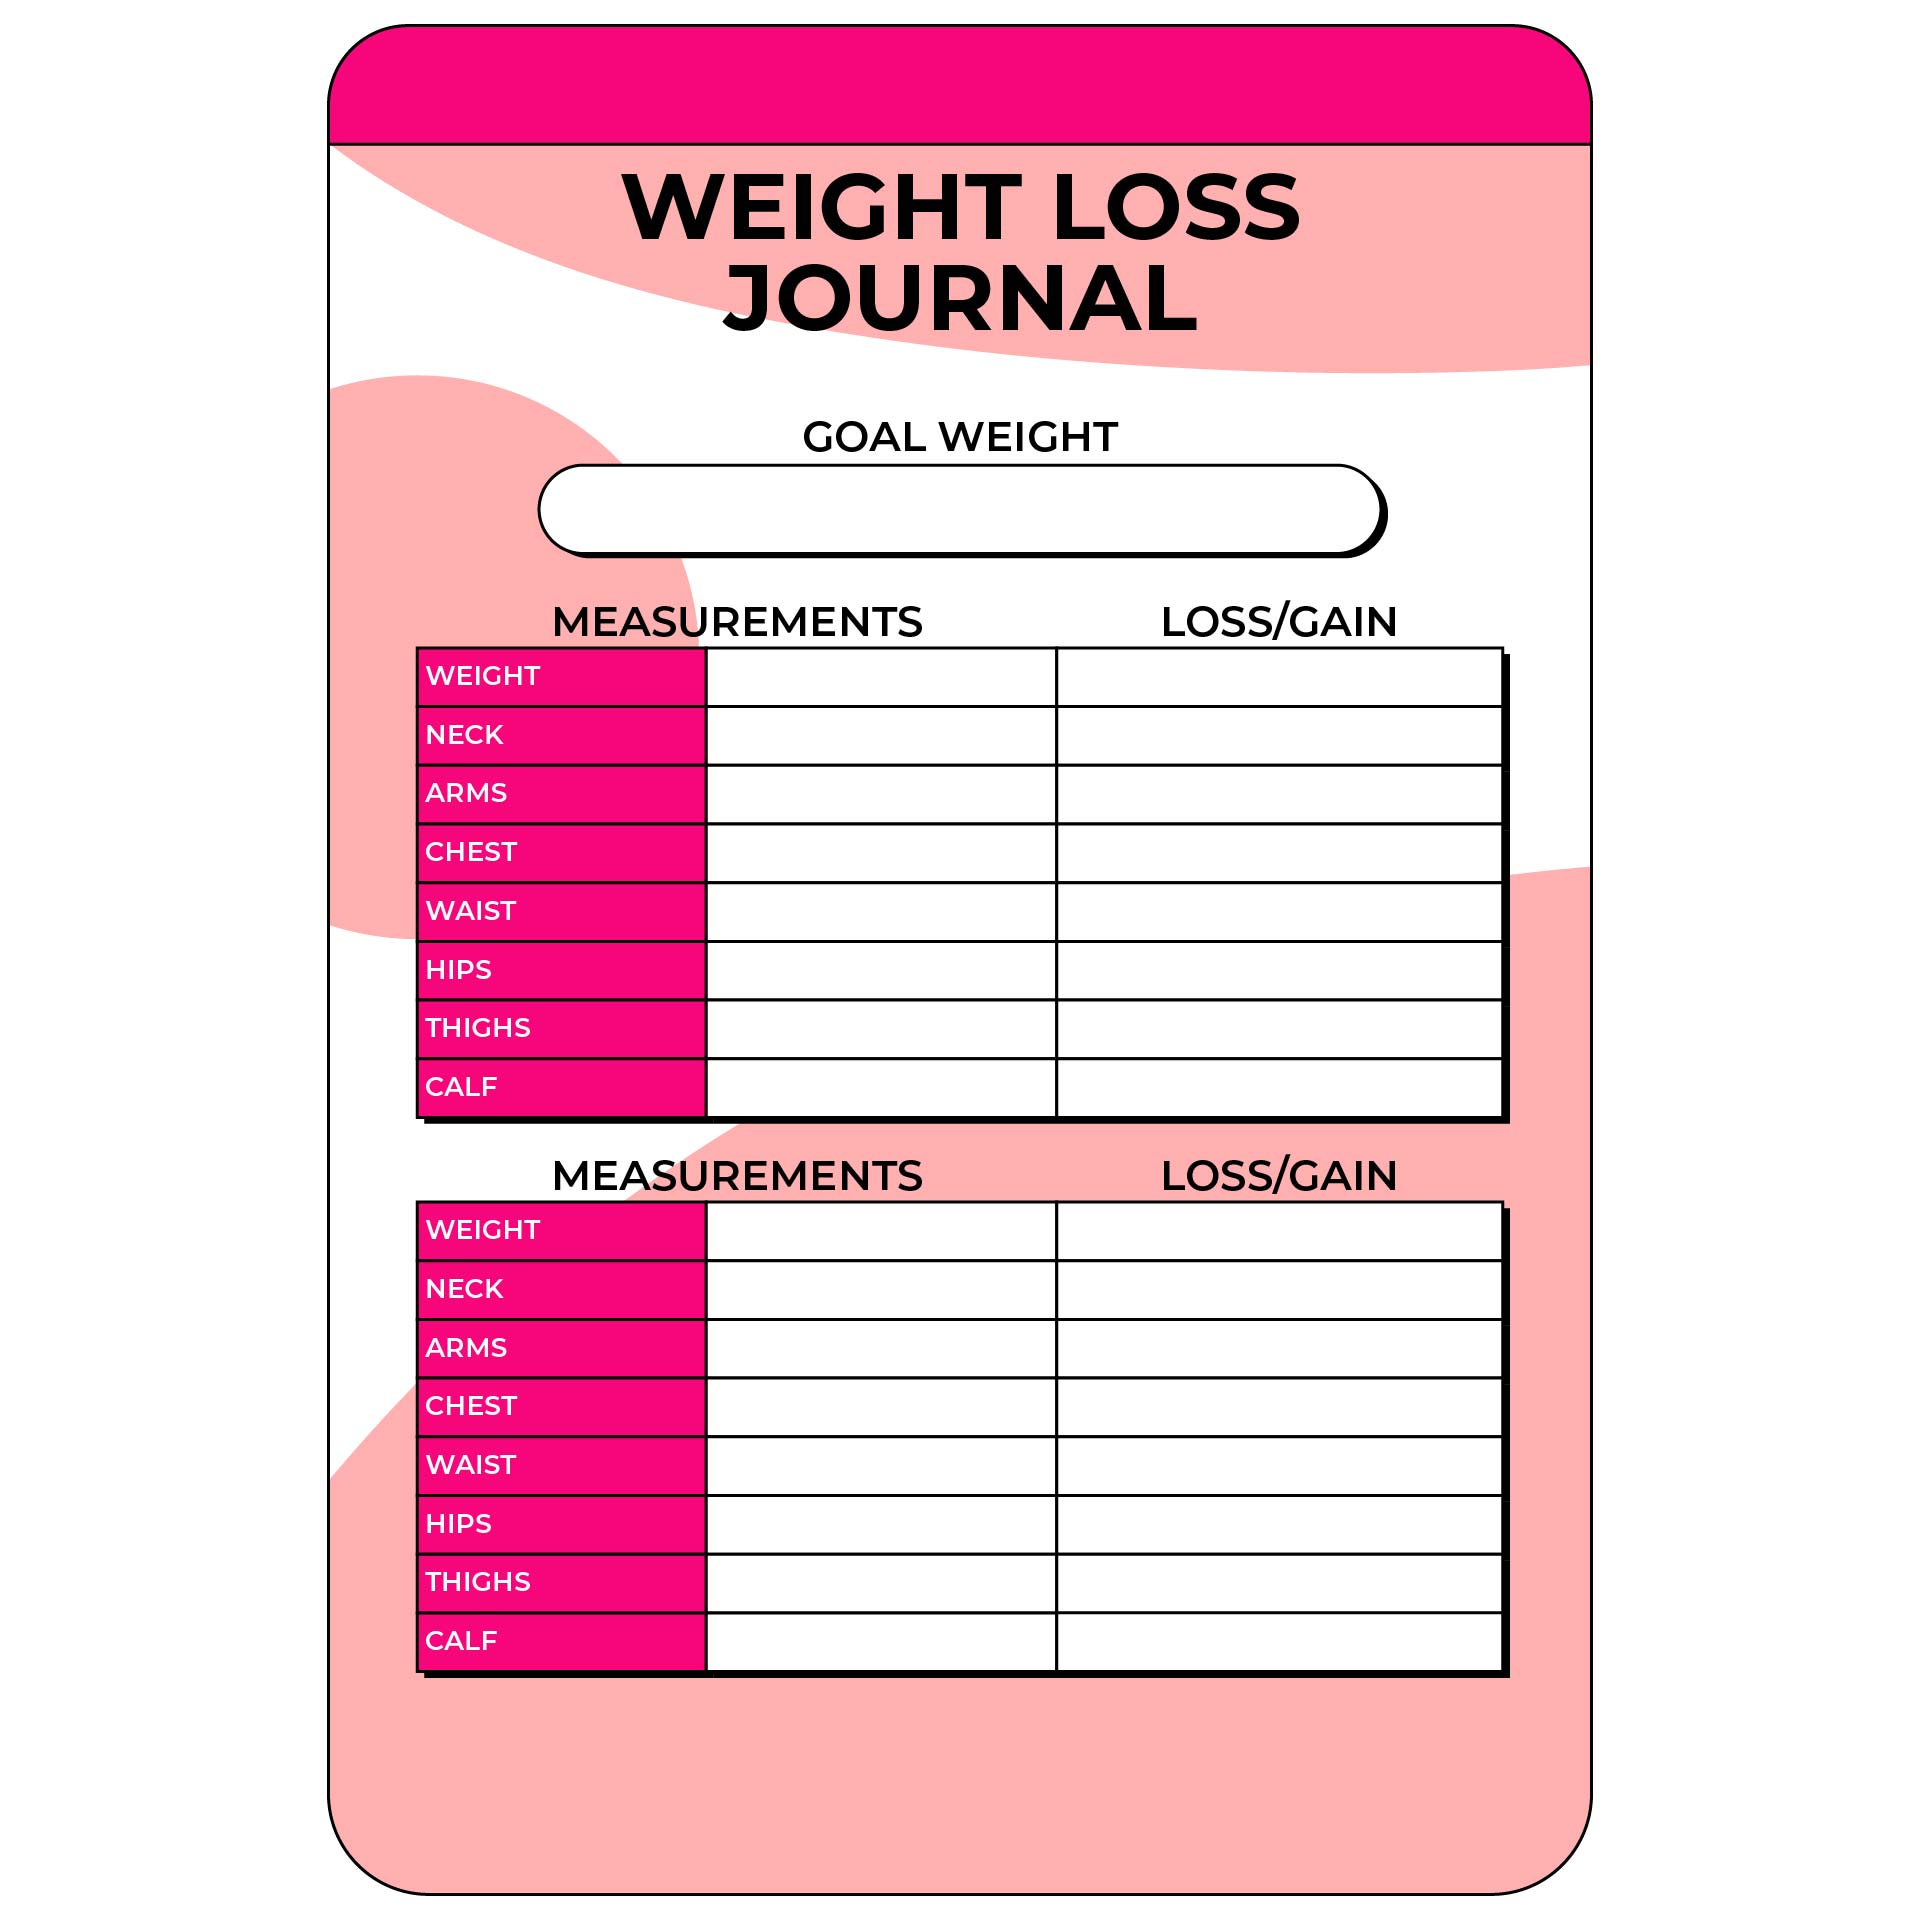 7-best-images-of-free-printable-weight-loss-logs-free-printable-daily